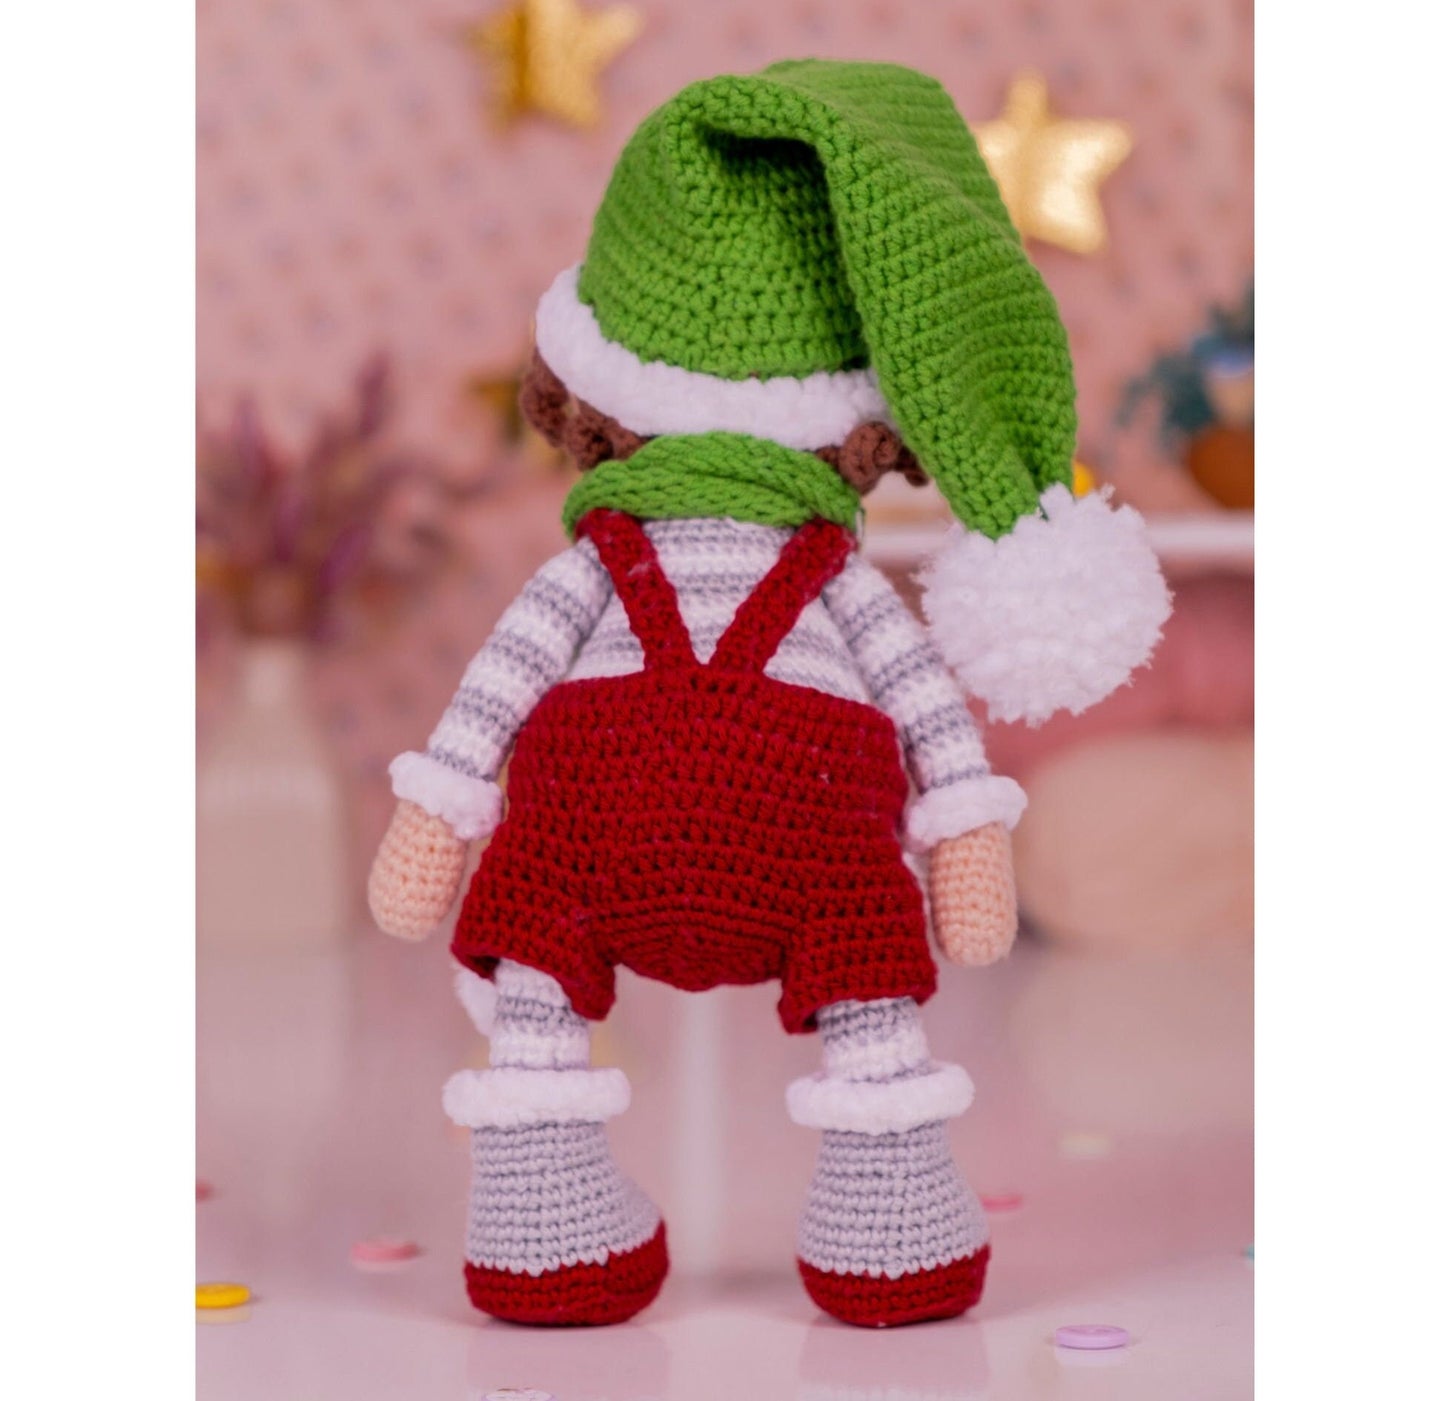 Crochet Boy Doll with Green Beanie Hat and Scarf